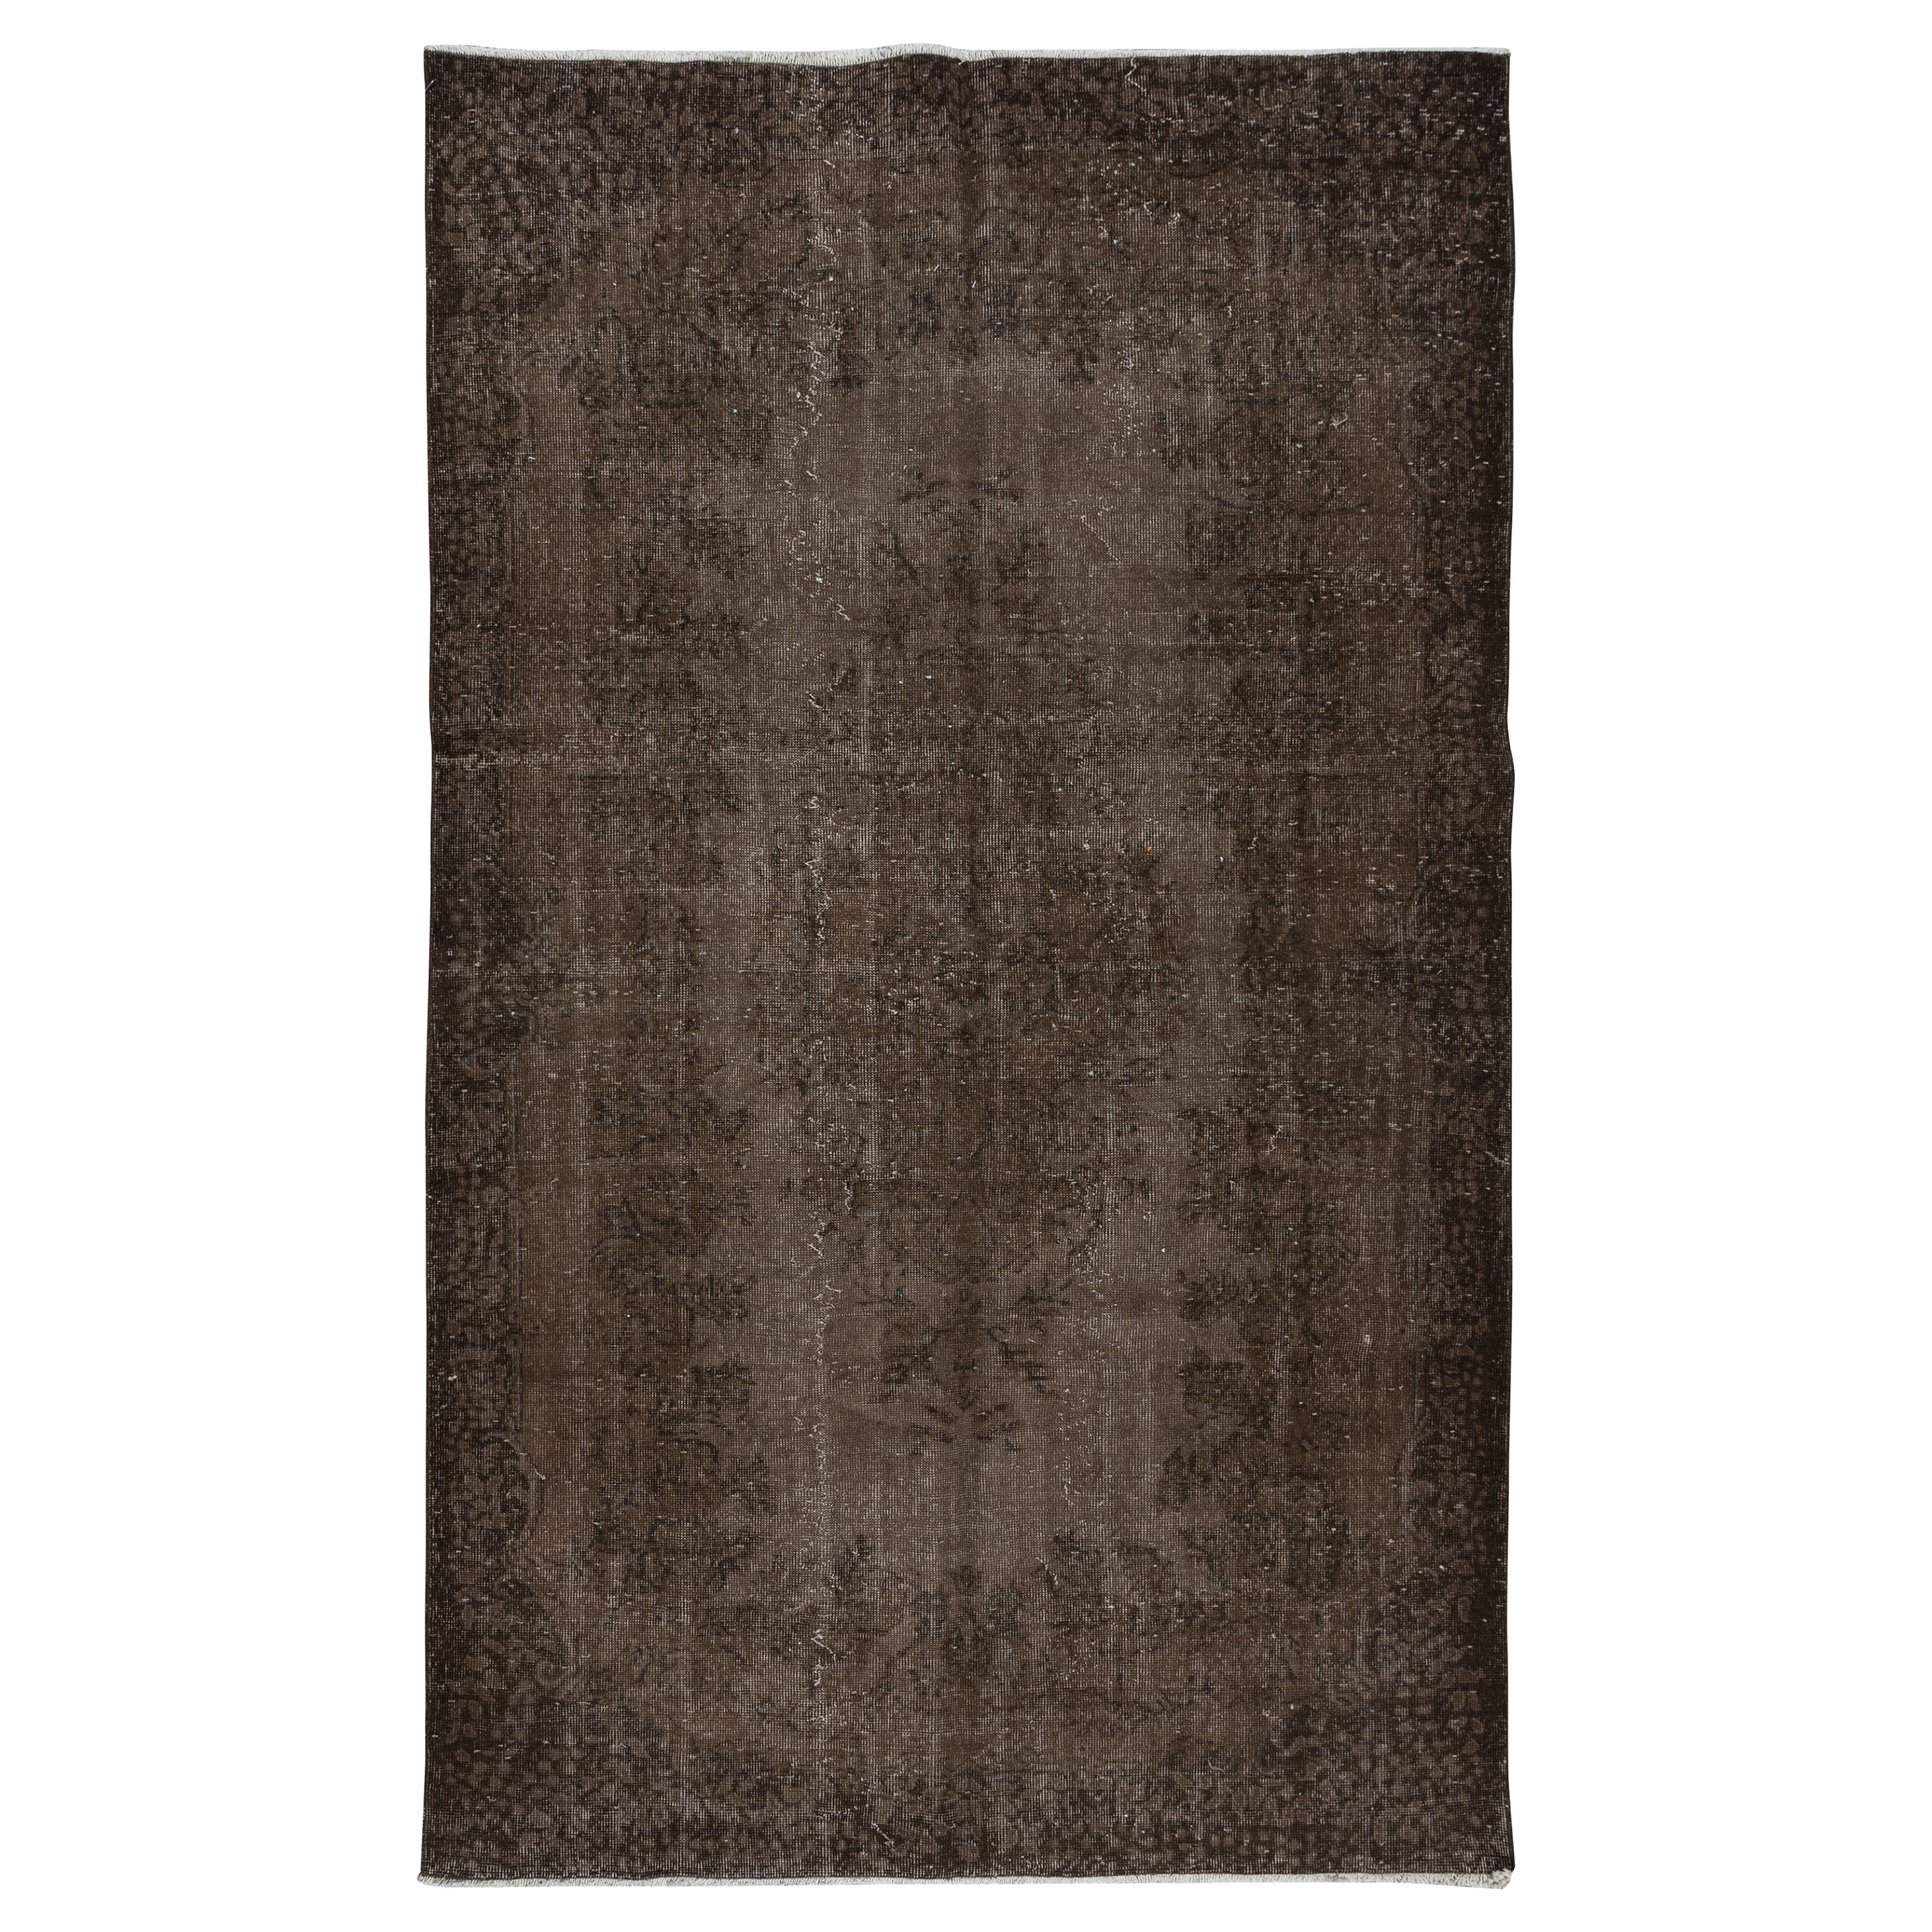 5.7x9.8 Ft Authentic Brown Area Rug for Modern Interiors, Hand-Knotted in Turkey For Sale